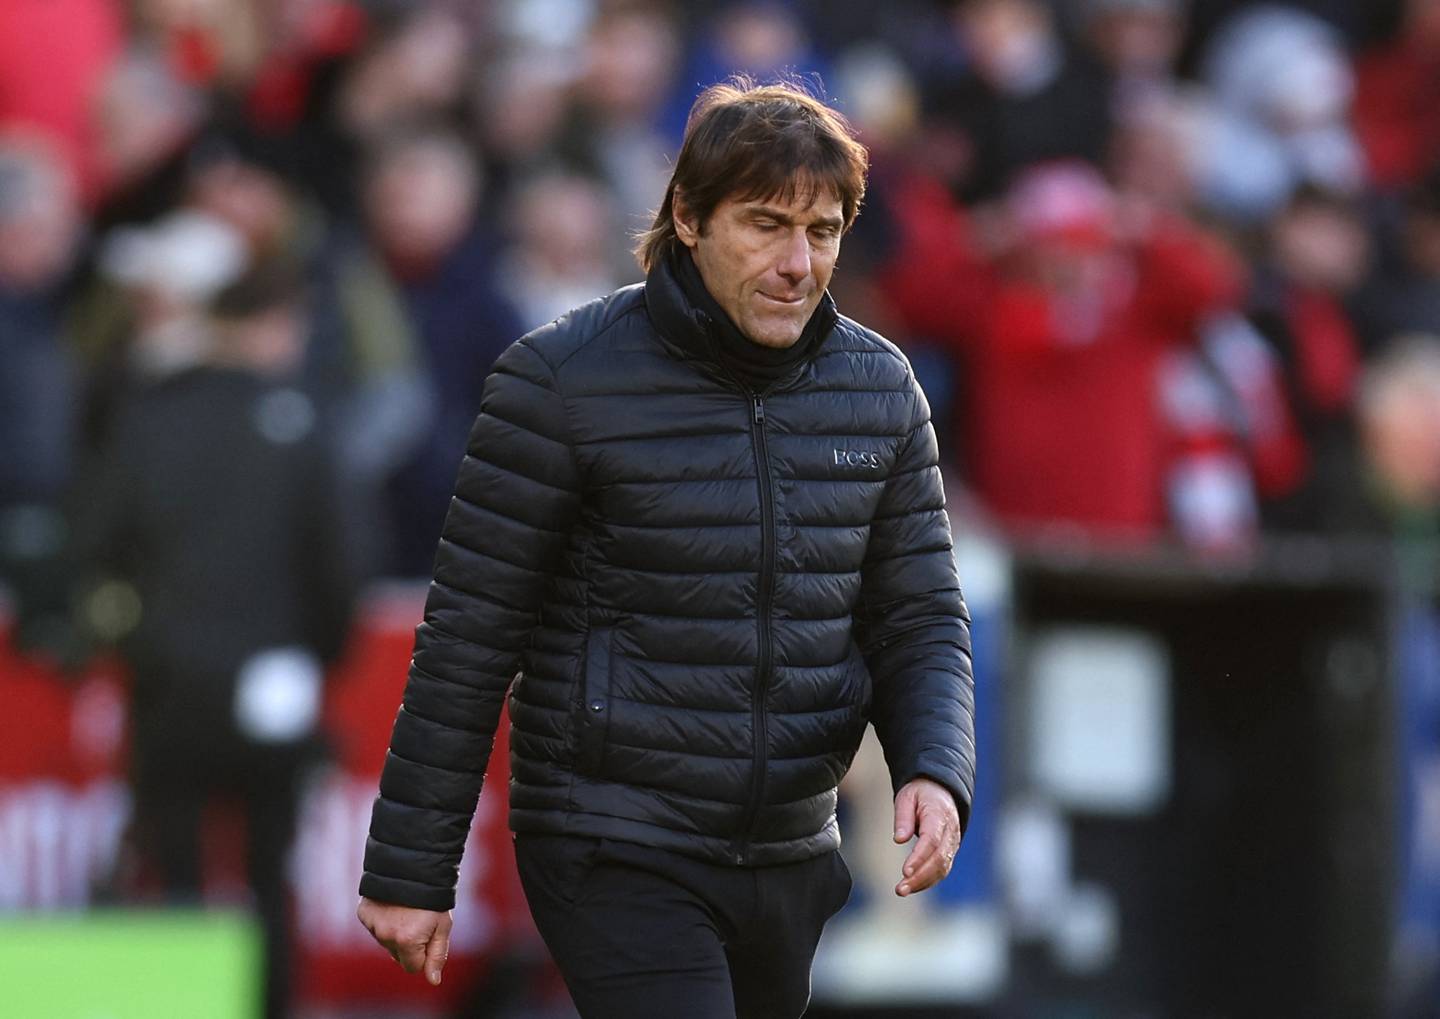 Tottenham Hotspur manager Antonio Conte praised his players' response to going 2-0 down but called on his team to become "more stable". Reuters